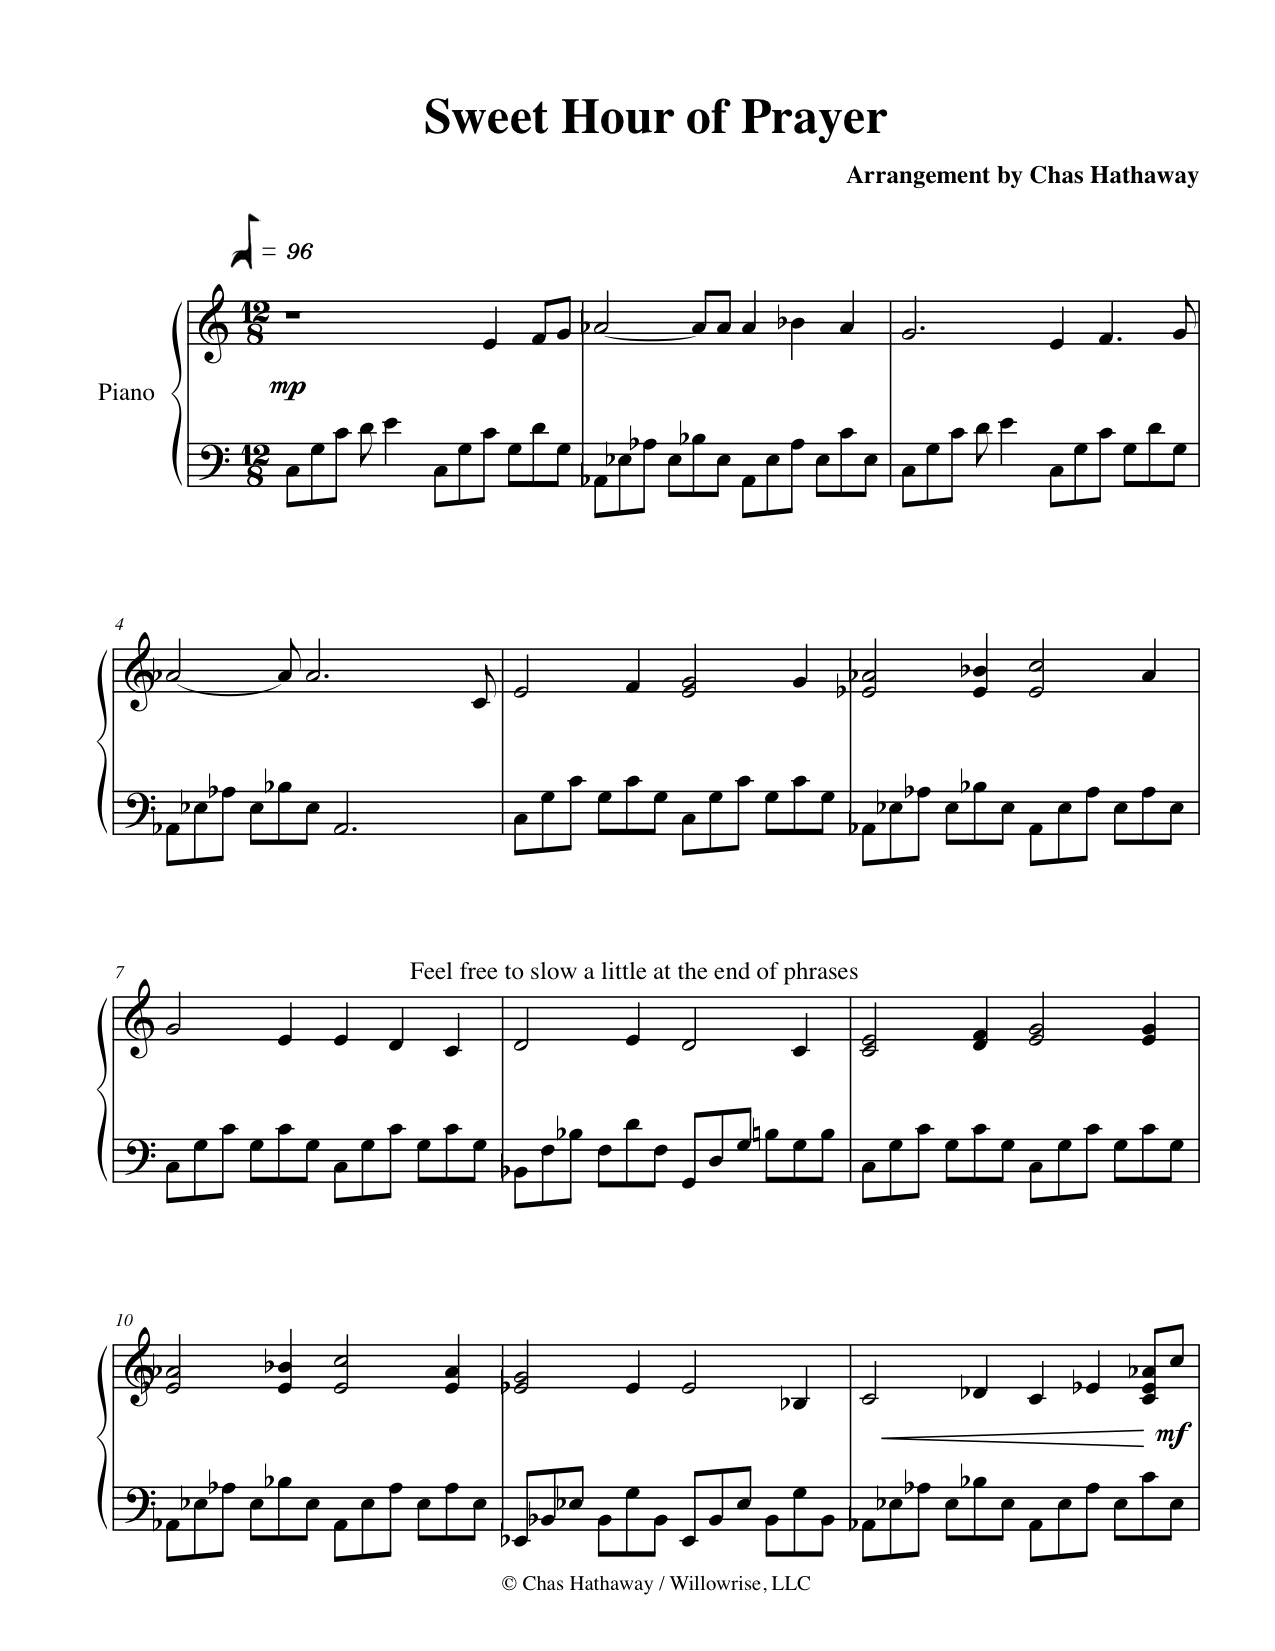 Sweet Hour of Prayer Sheet Music by Chas Hathaway